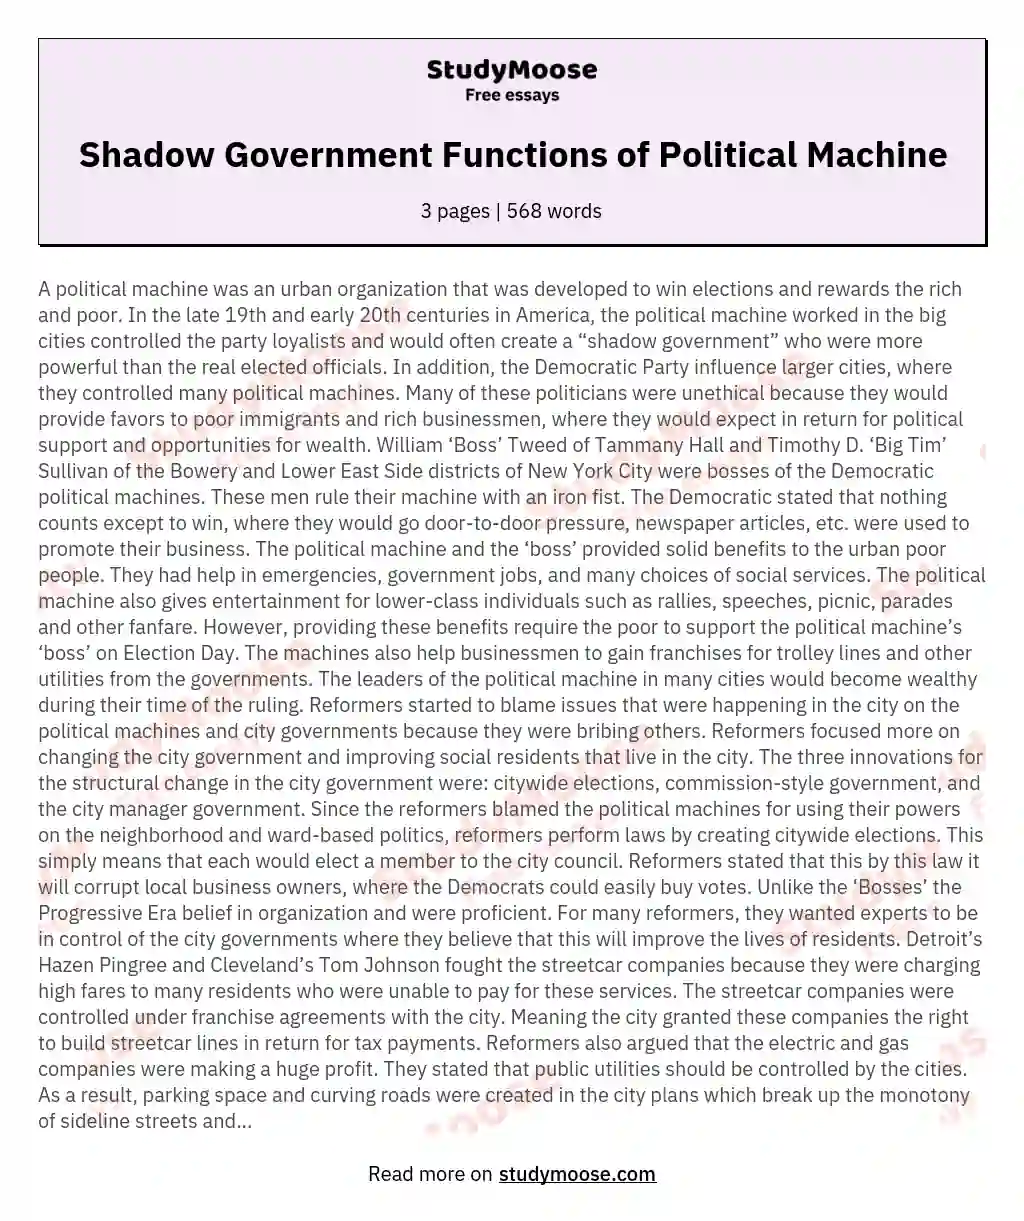 Shadow Government Functions of Political Machine essay